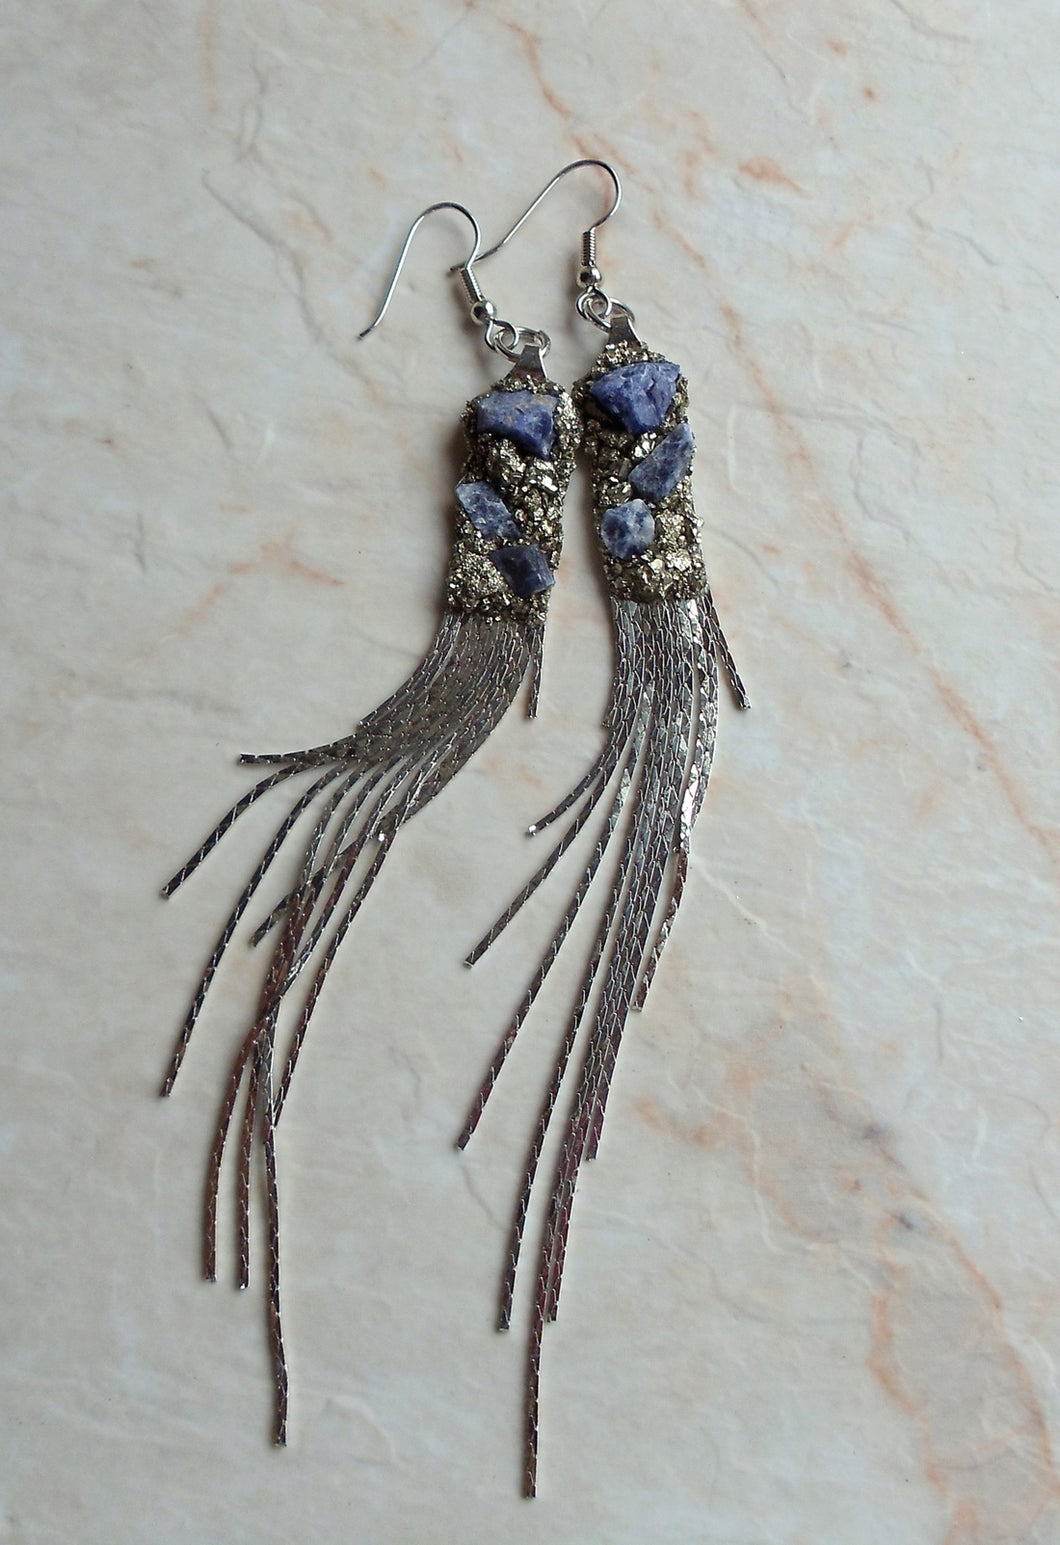 EARRING - Silver Plated fringe earring with Sodalite and Pyrite stones  -  EAR-125 Sodalite